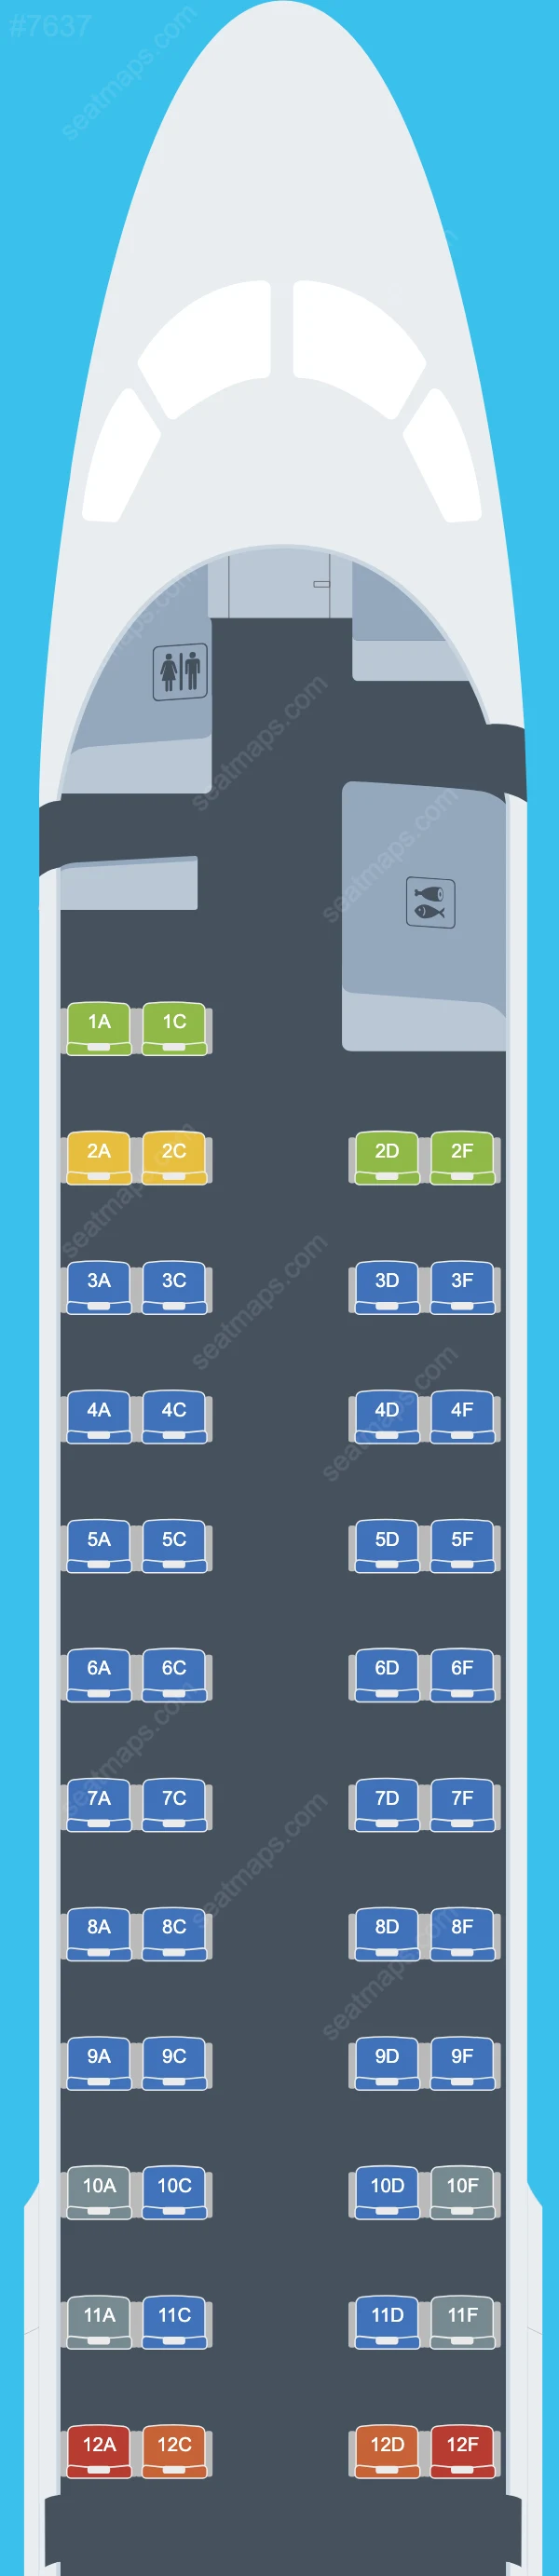 GX Airlines Embraer E190 seatmap preview